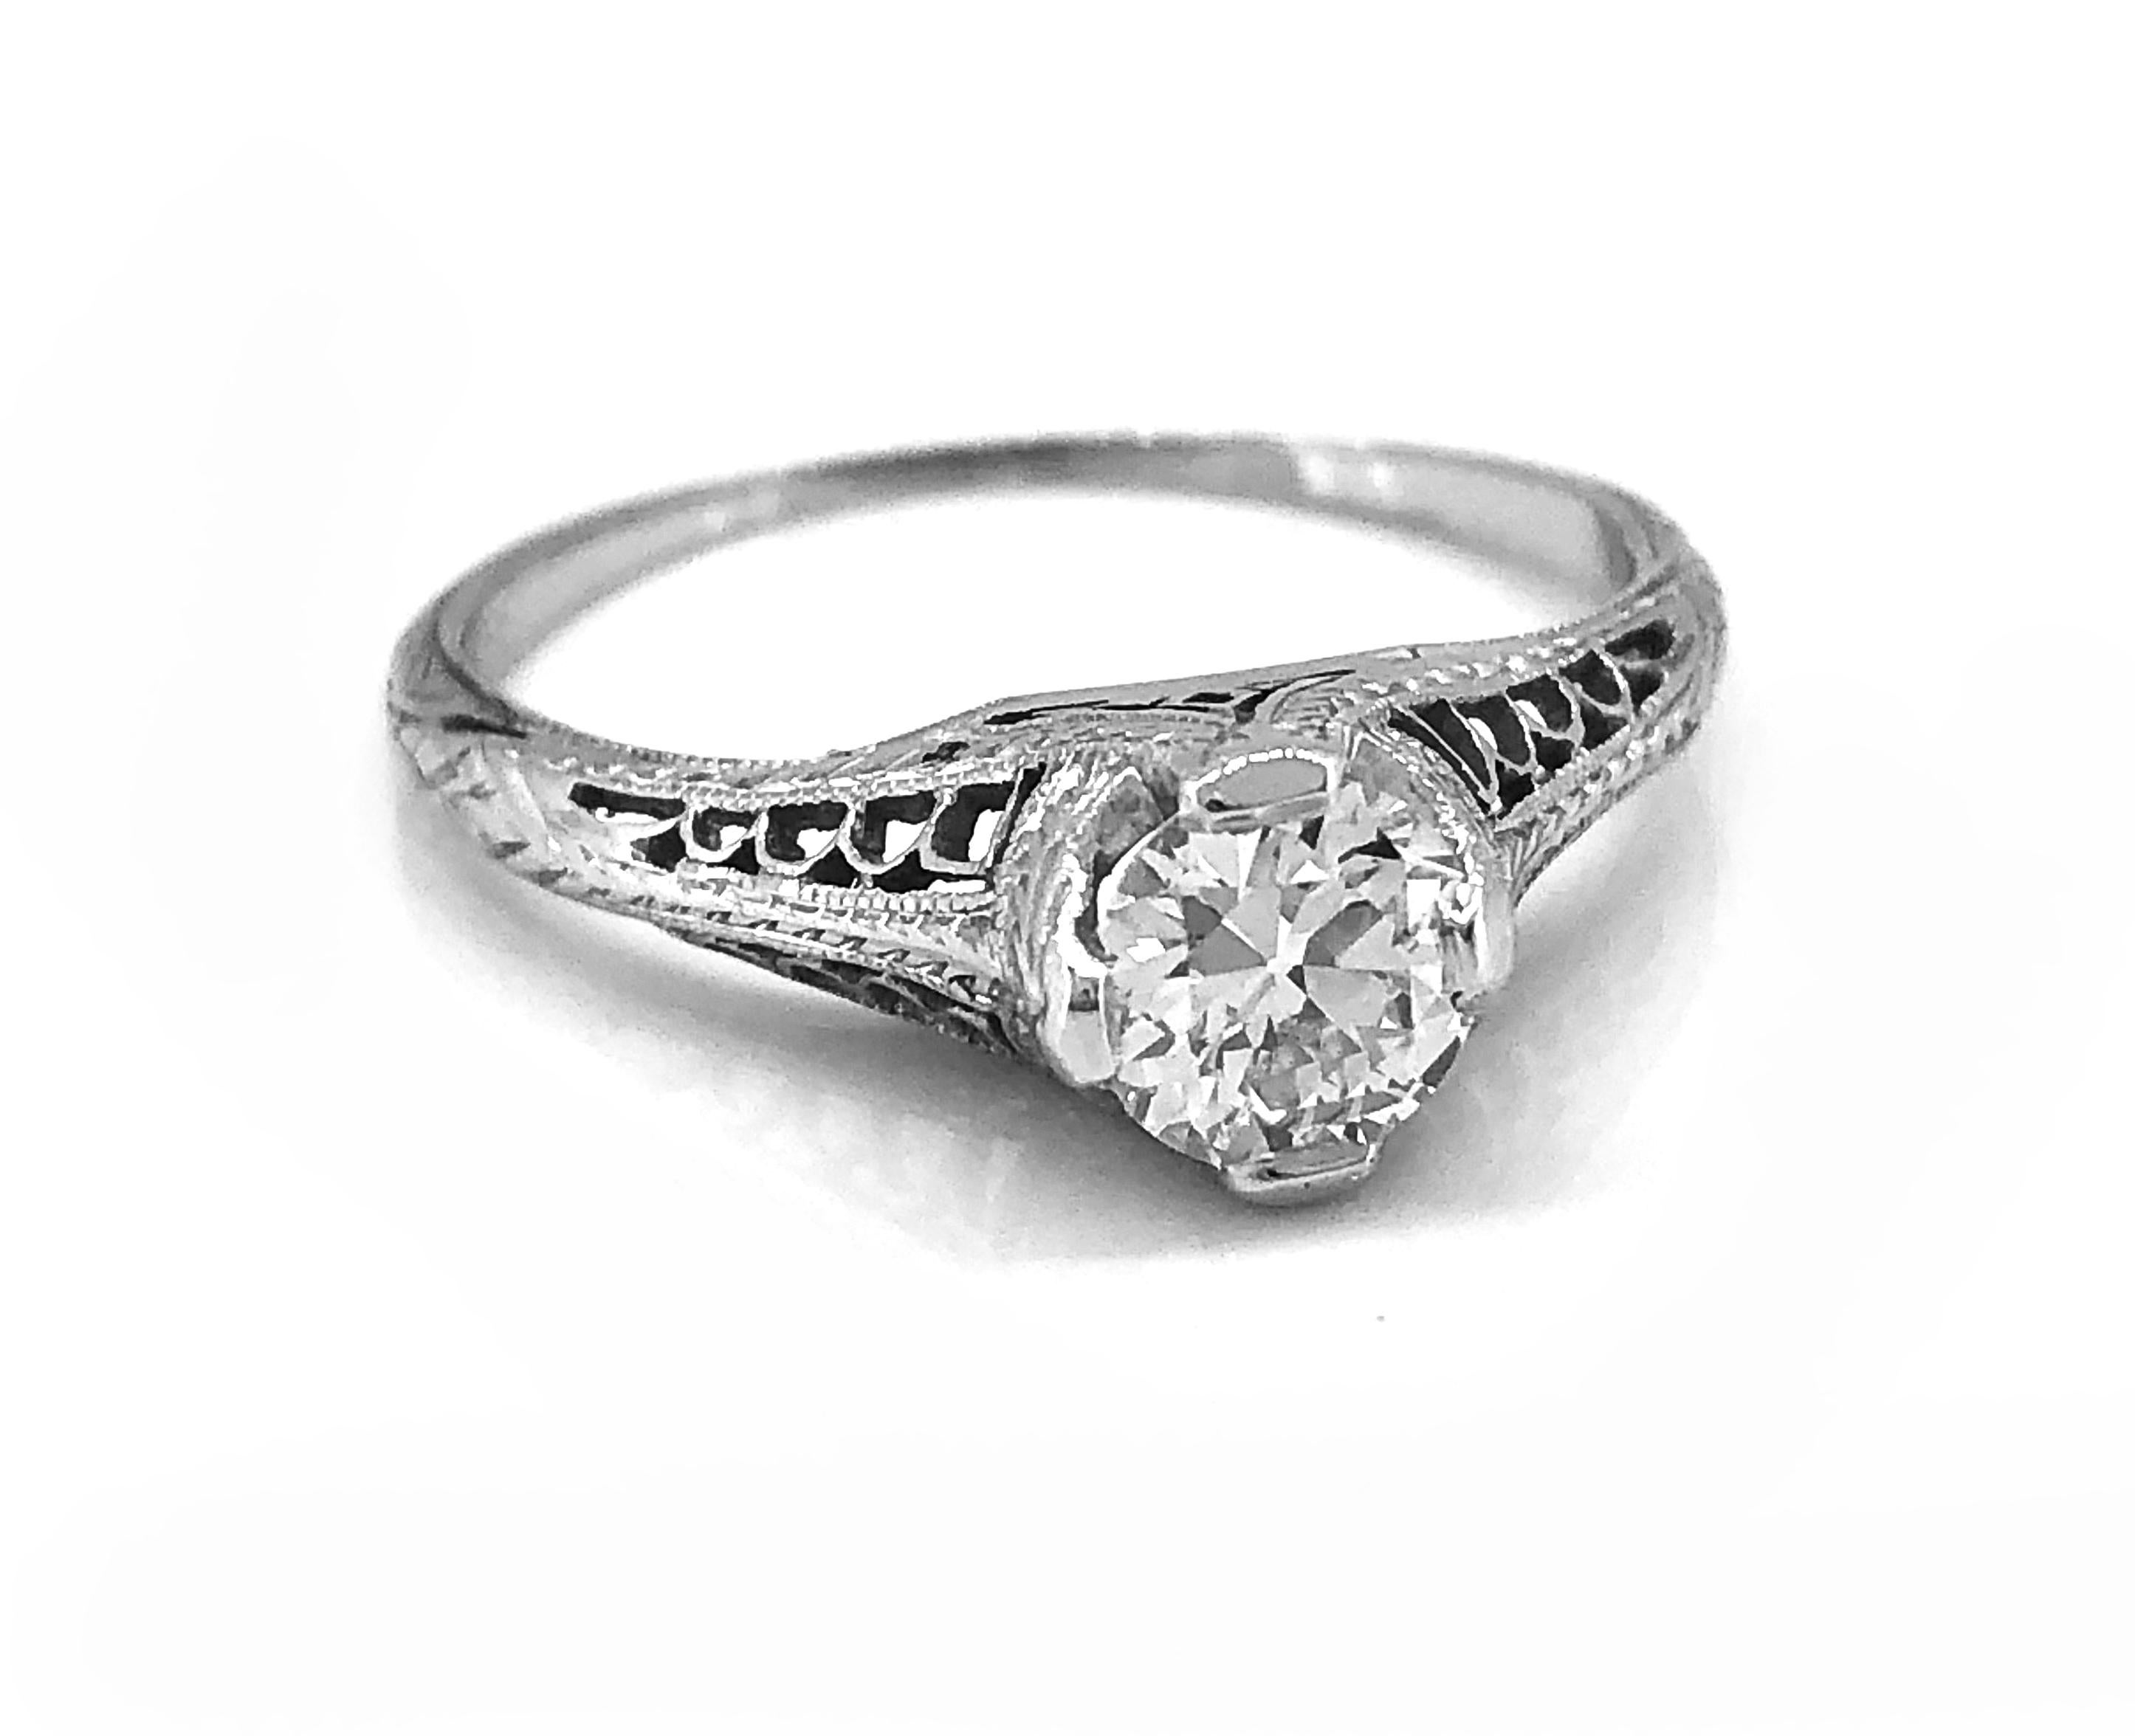 A beautifully pierced and engraved Art Deco Antique engagement ring that features .55ct. apx. Transitional cut diamond with SI1 clarity and H color. Crafted in platinum, this exceptional diamond engagement ring is sure to delight and turn